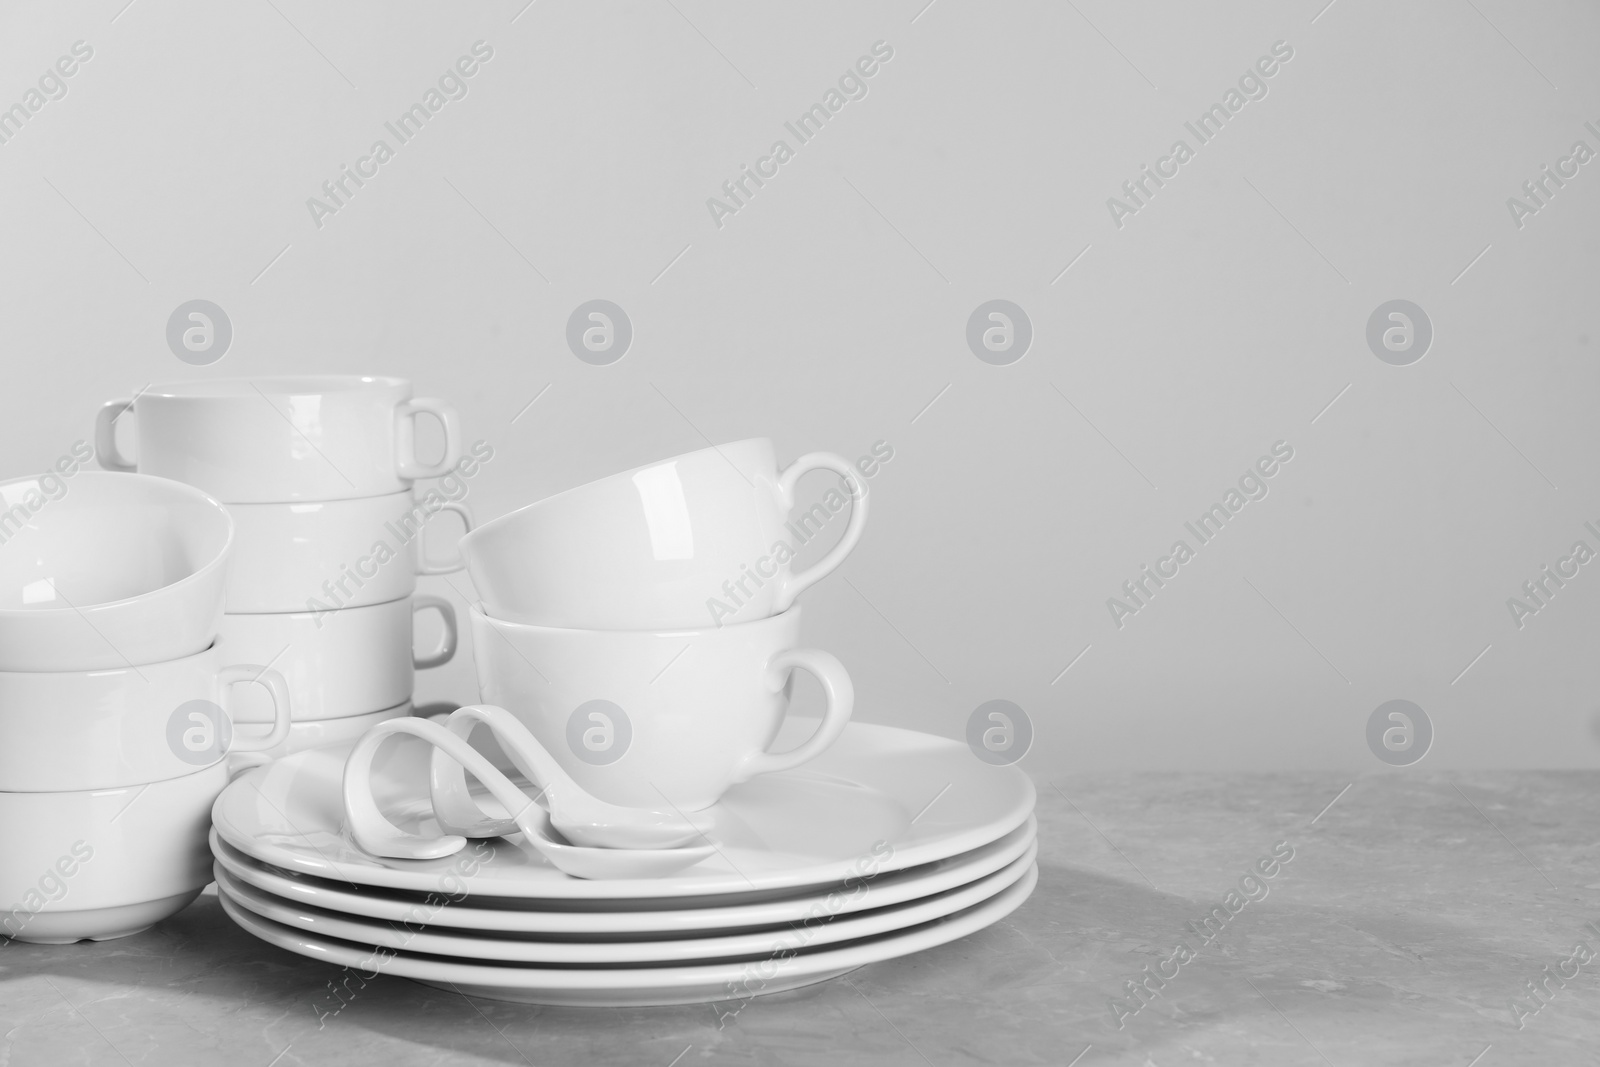 Photo of Set of clean dishware on grey table against light background. Space for text